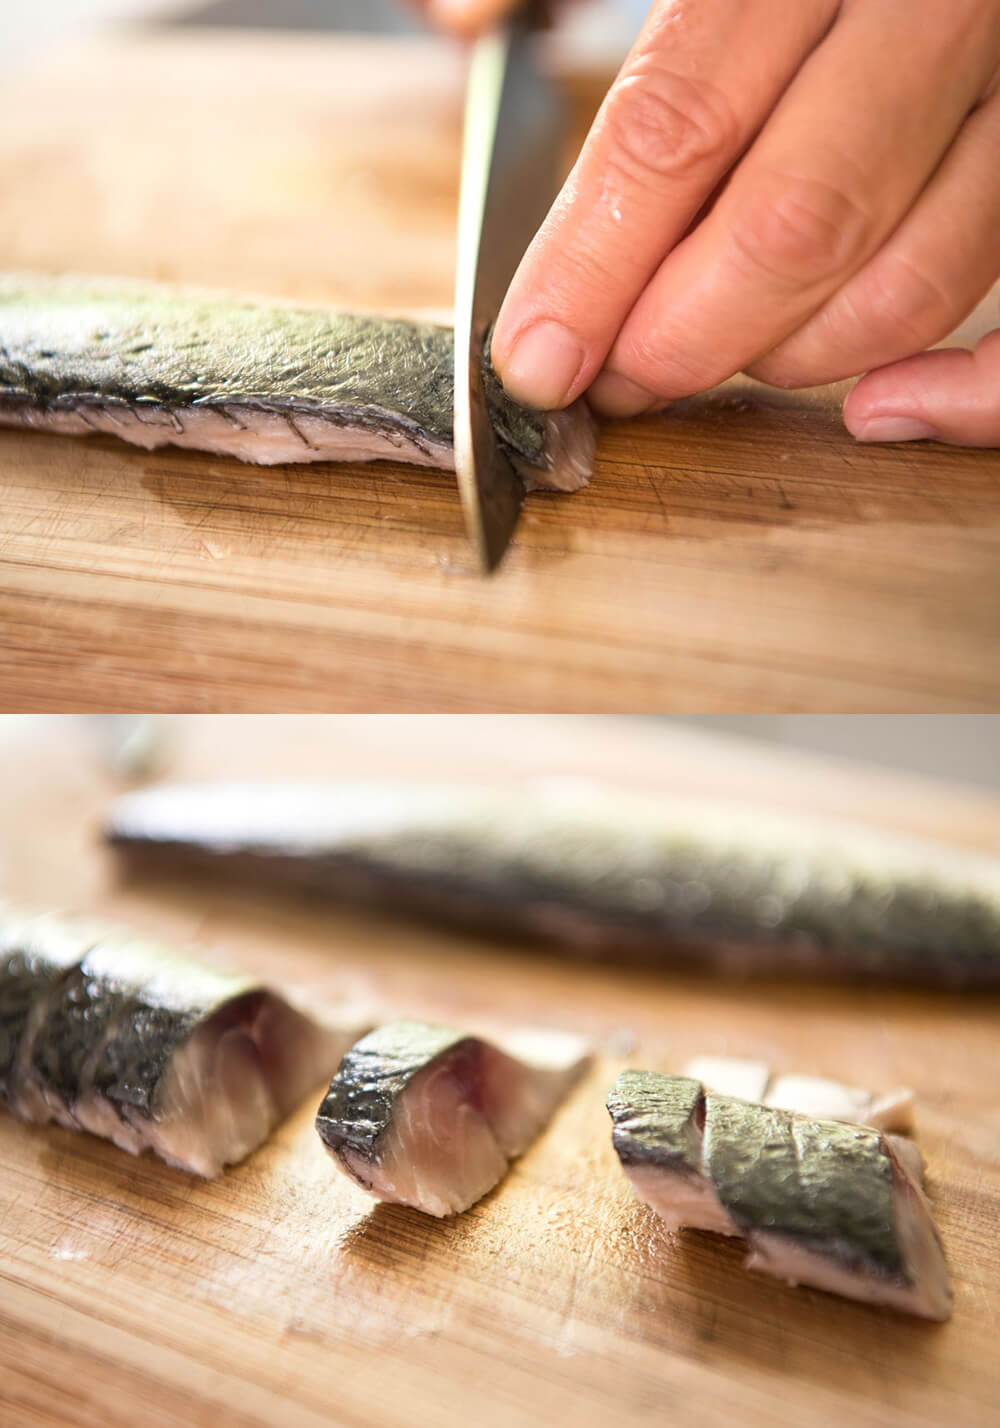 Shime saba is a cured mackerel fillet that is great for sashimi as well as sushi topping. It is very simple to make and so tasty. All you need is mackerel, salt and rice wine vinegar. If you can get a very fresh mackerel, you must try this. No cooking, just marinating! 